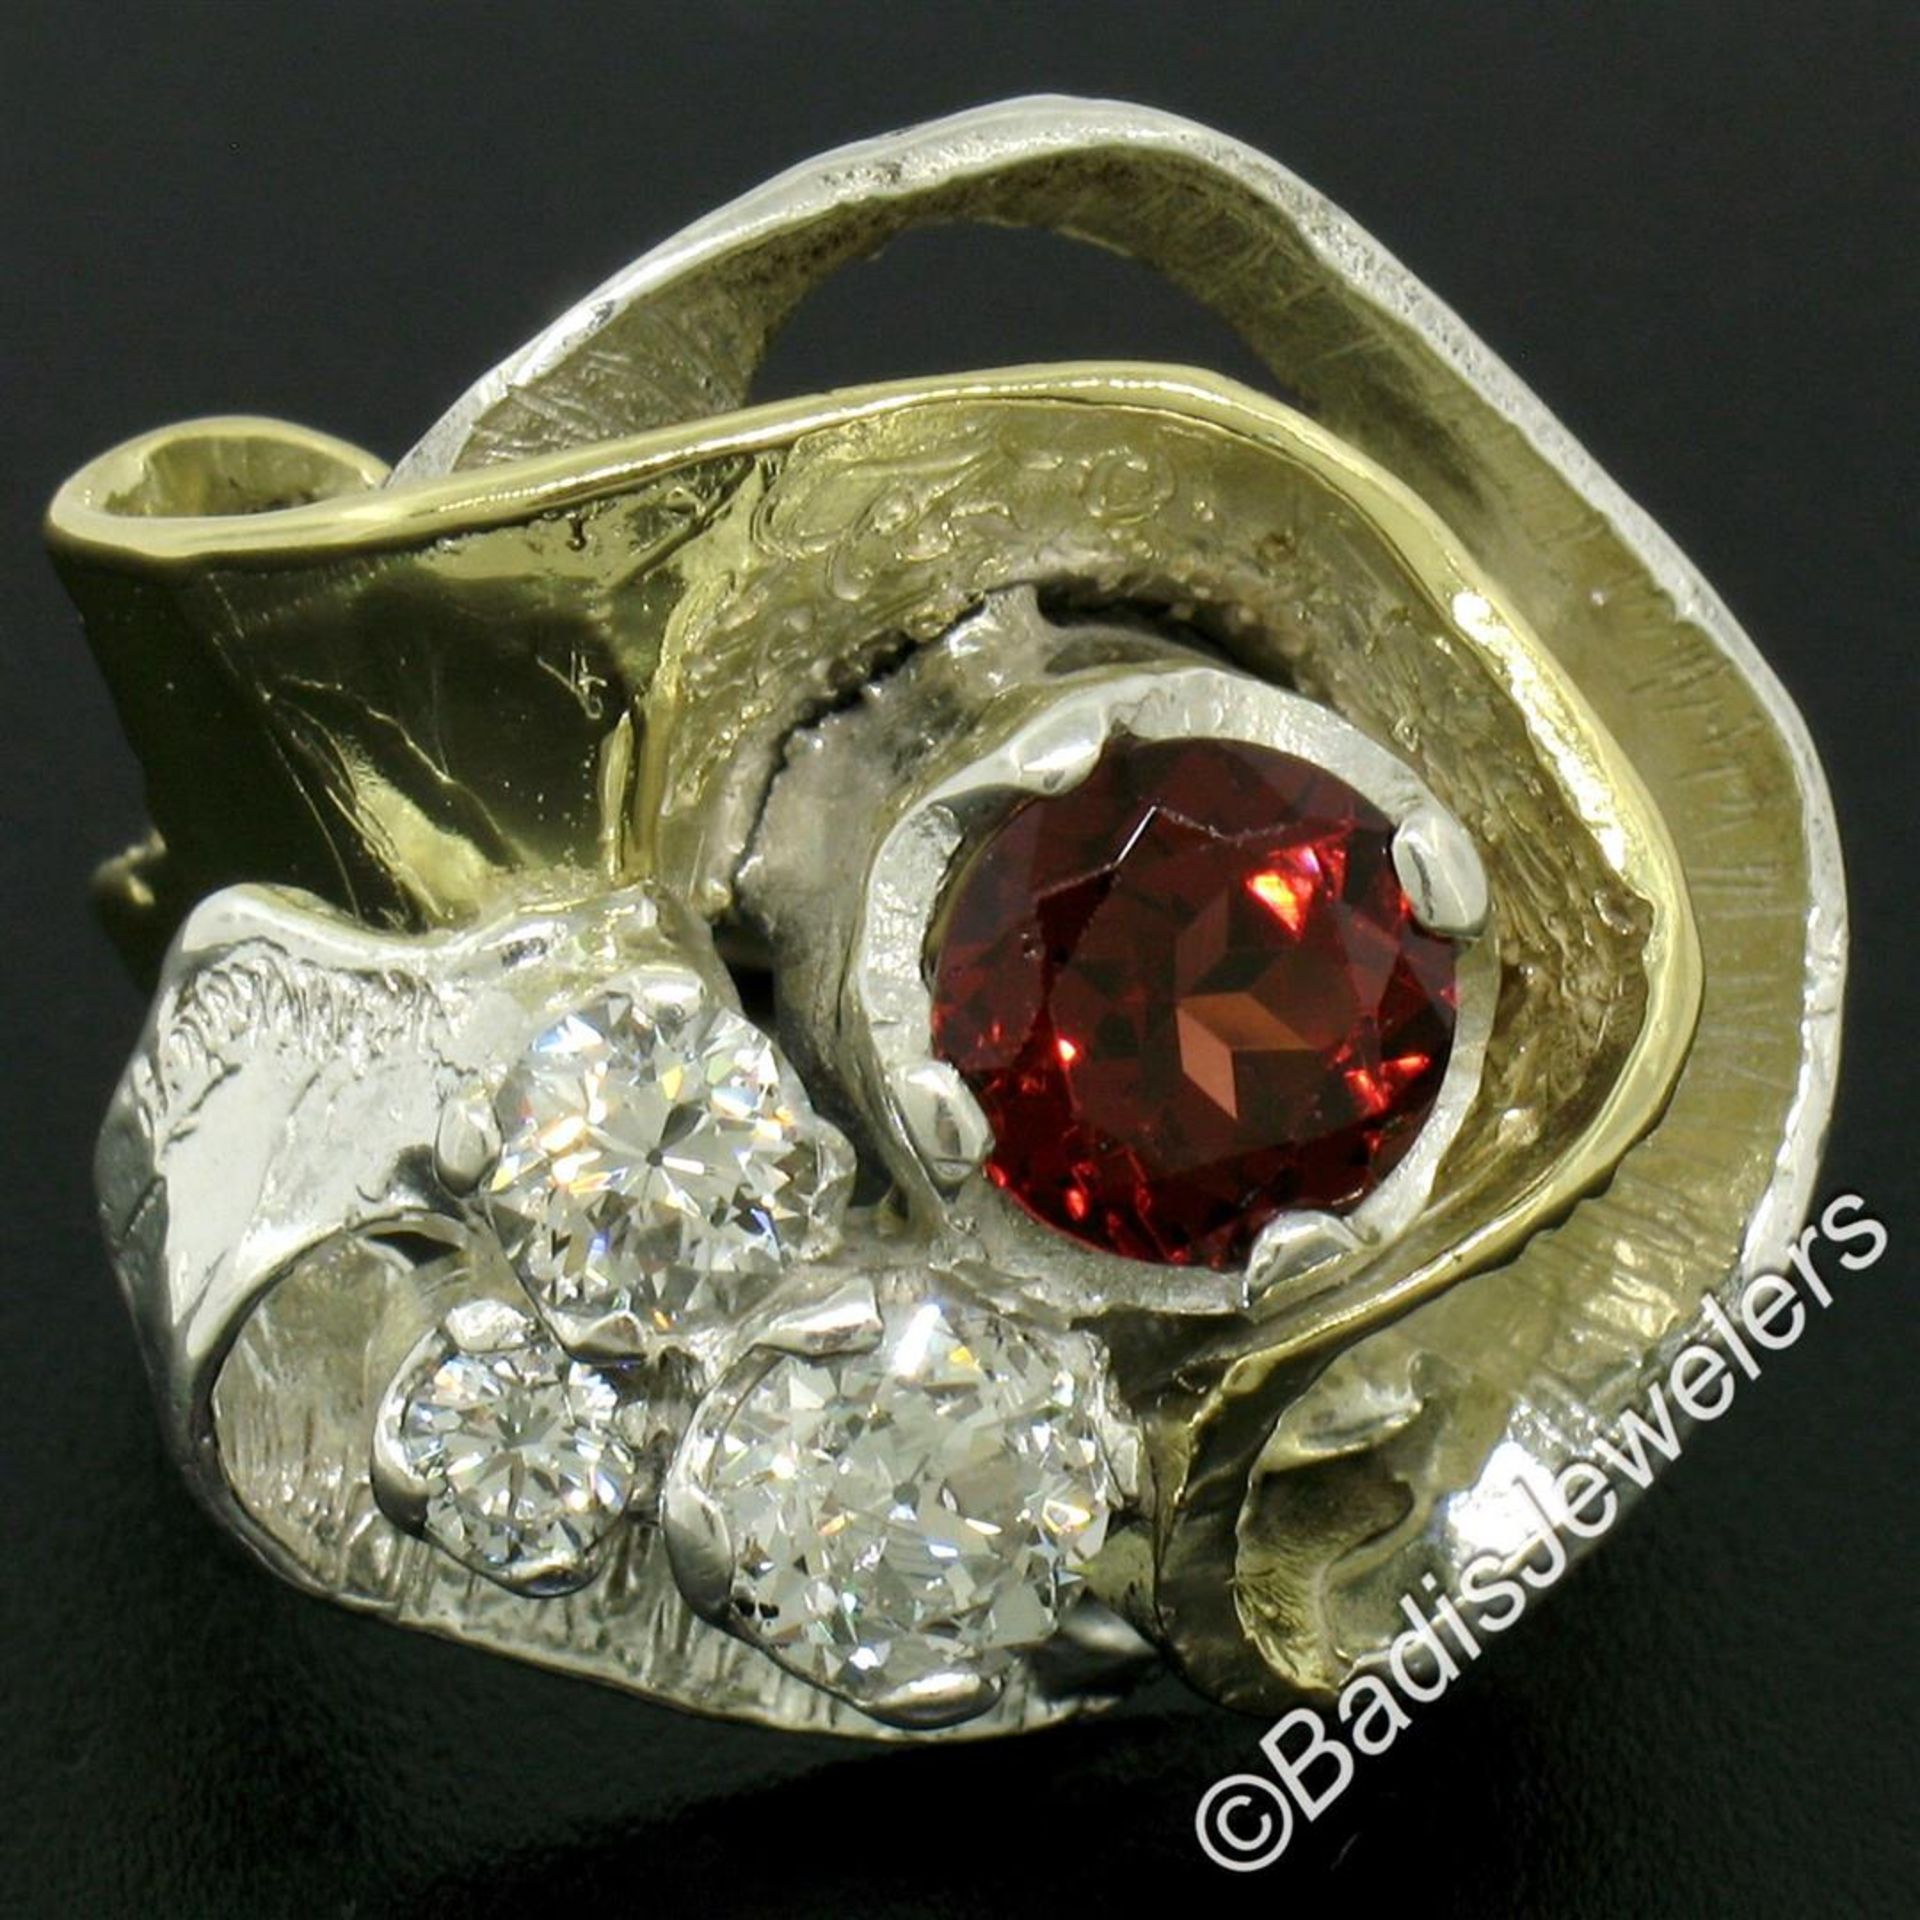 18kt Yellow Gold and Sterling Silver 2.73ctw Garnet and Diamond Cocktail Ring - Image 2 of 9